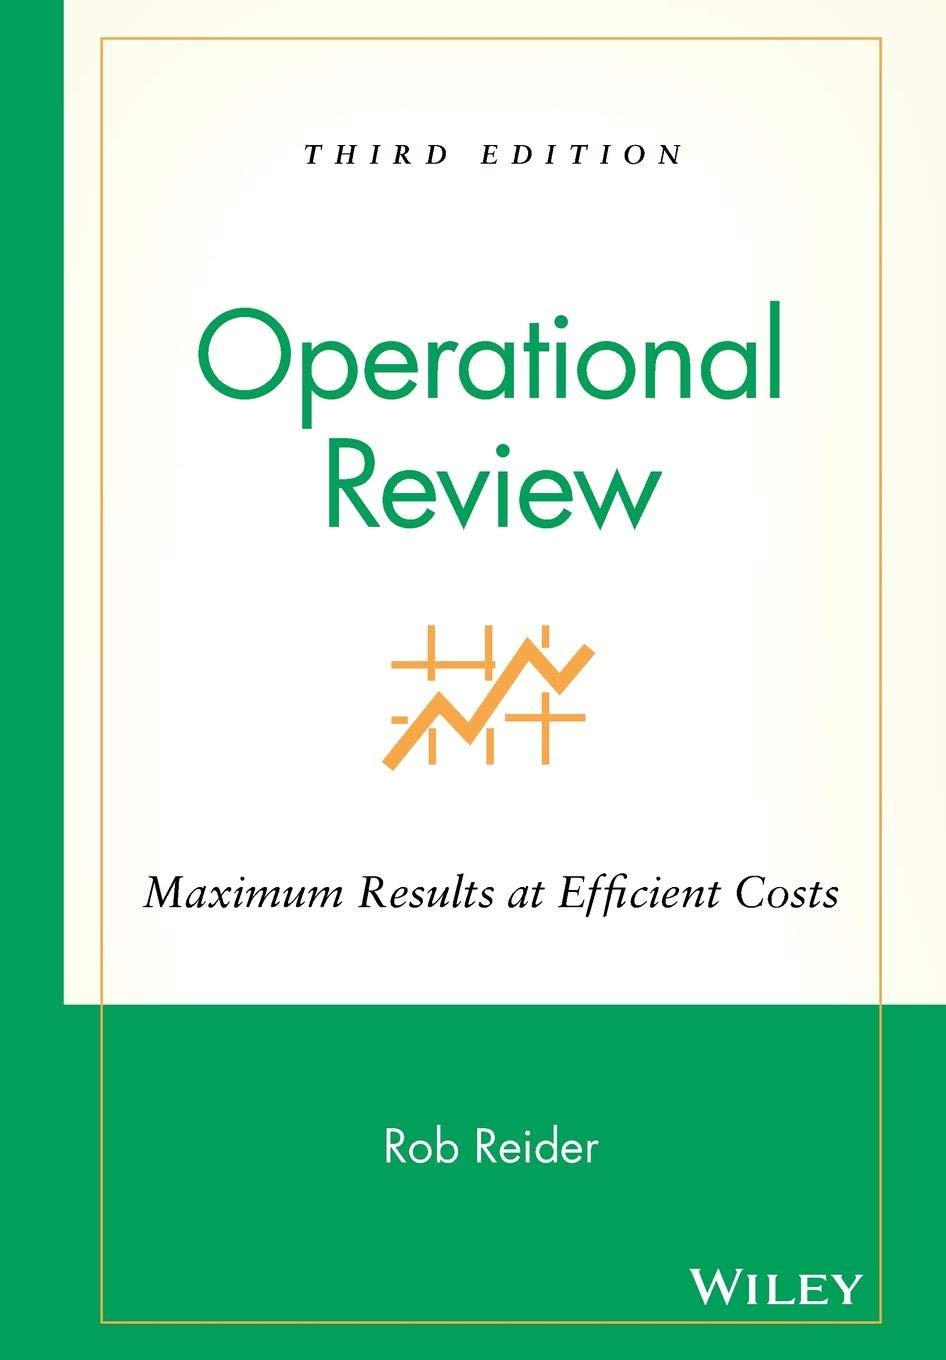 operational review maximum results at efficient costs 3rd edition rob reider 0471228109, 978-0471228103